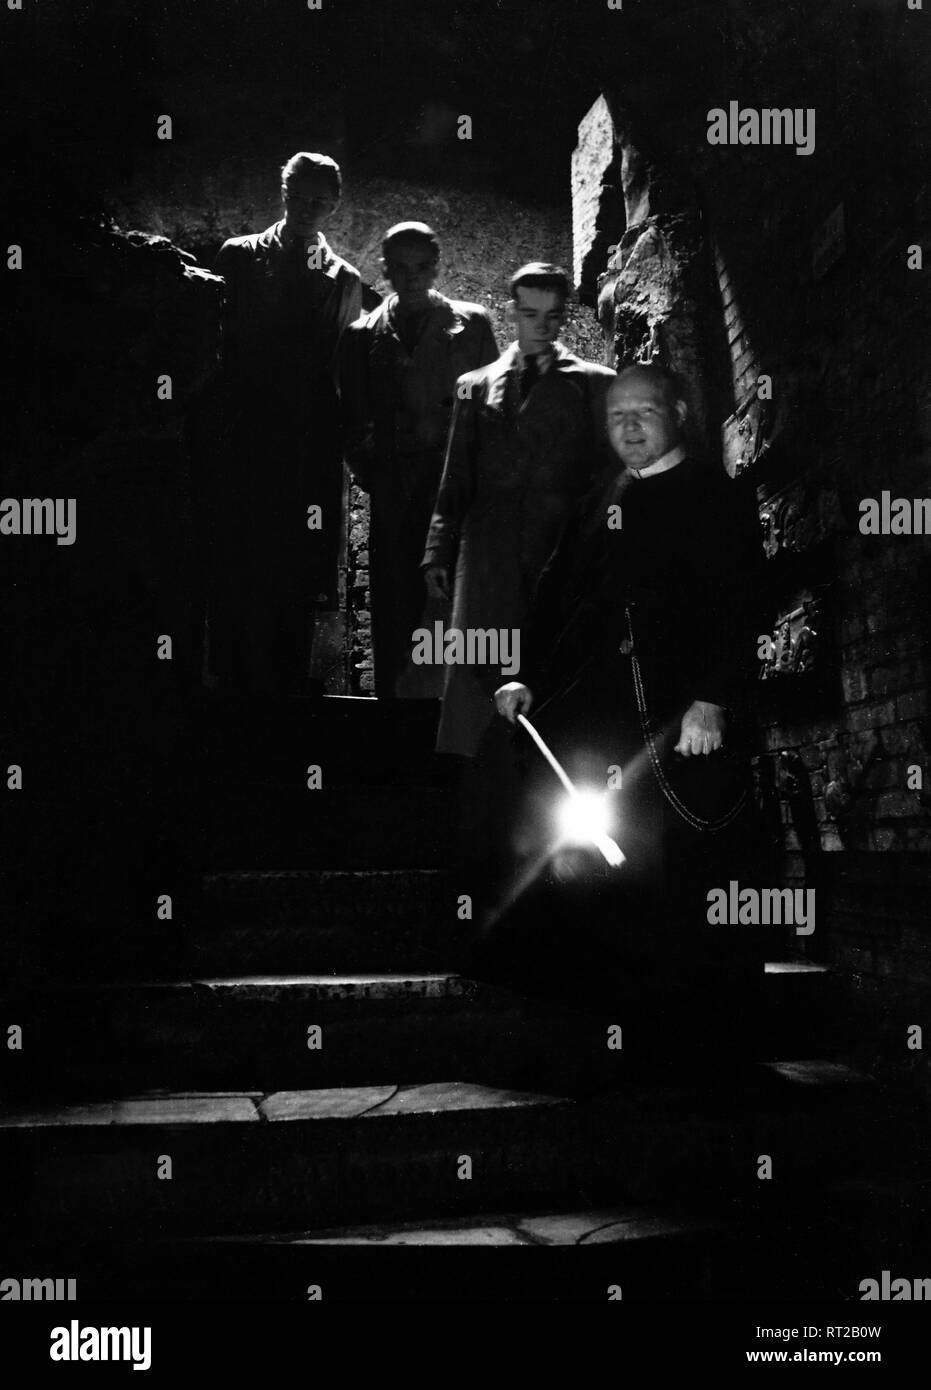 Travel to Rome - Italy in 1950s - Priest and visitors on the staircase to the Catacombs in Rome. Image taken in 1954 by Erich Andres Stock Photo